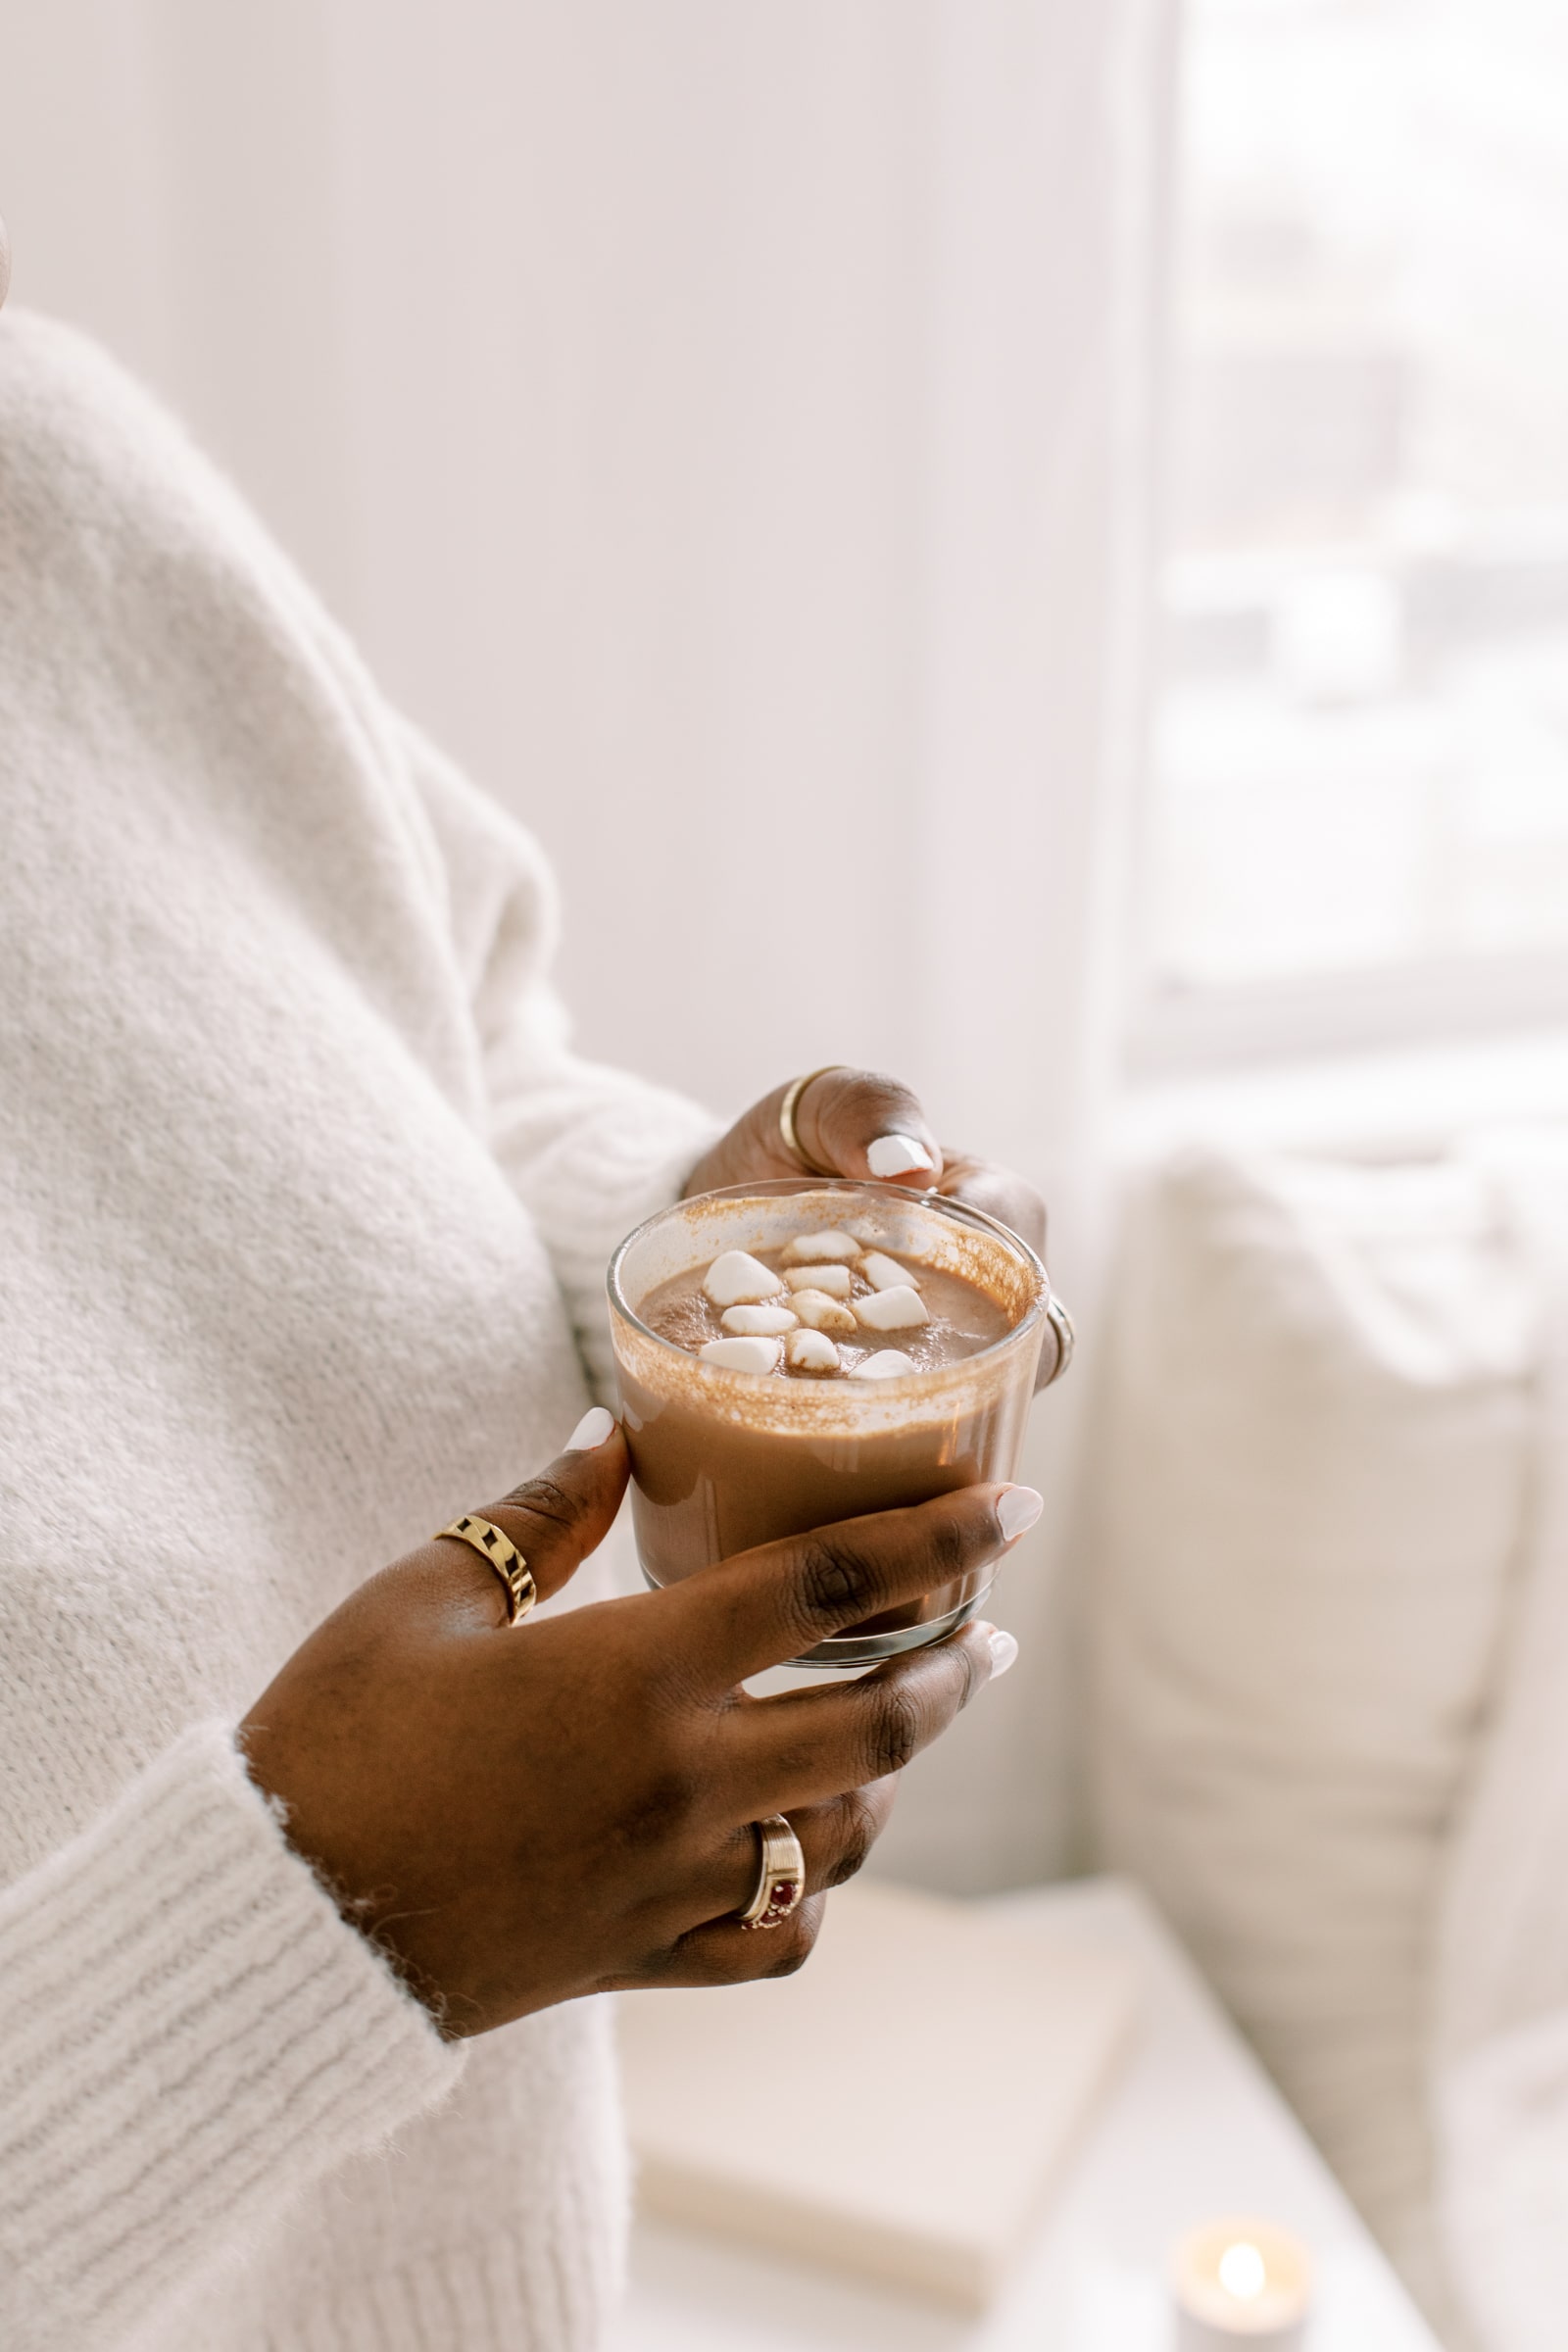 A woman drinking a hot chocolate (close up)